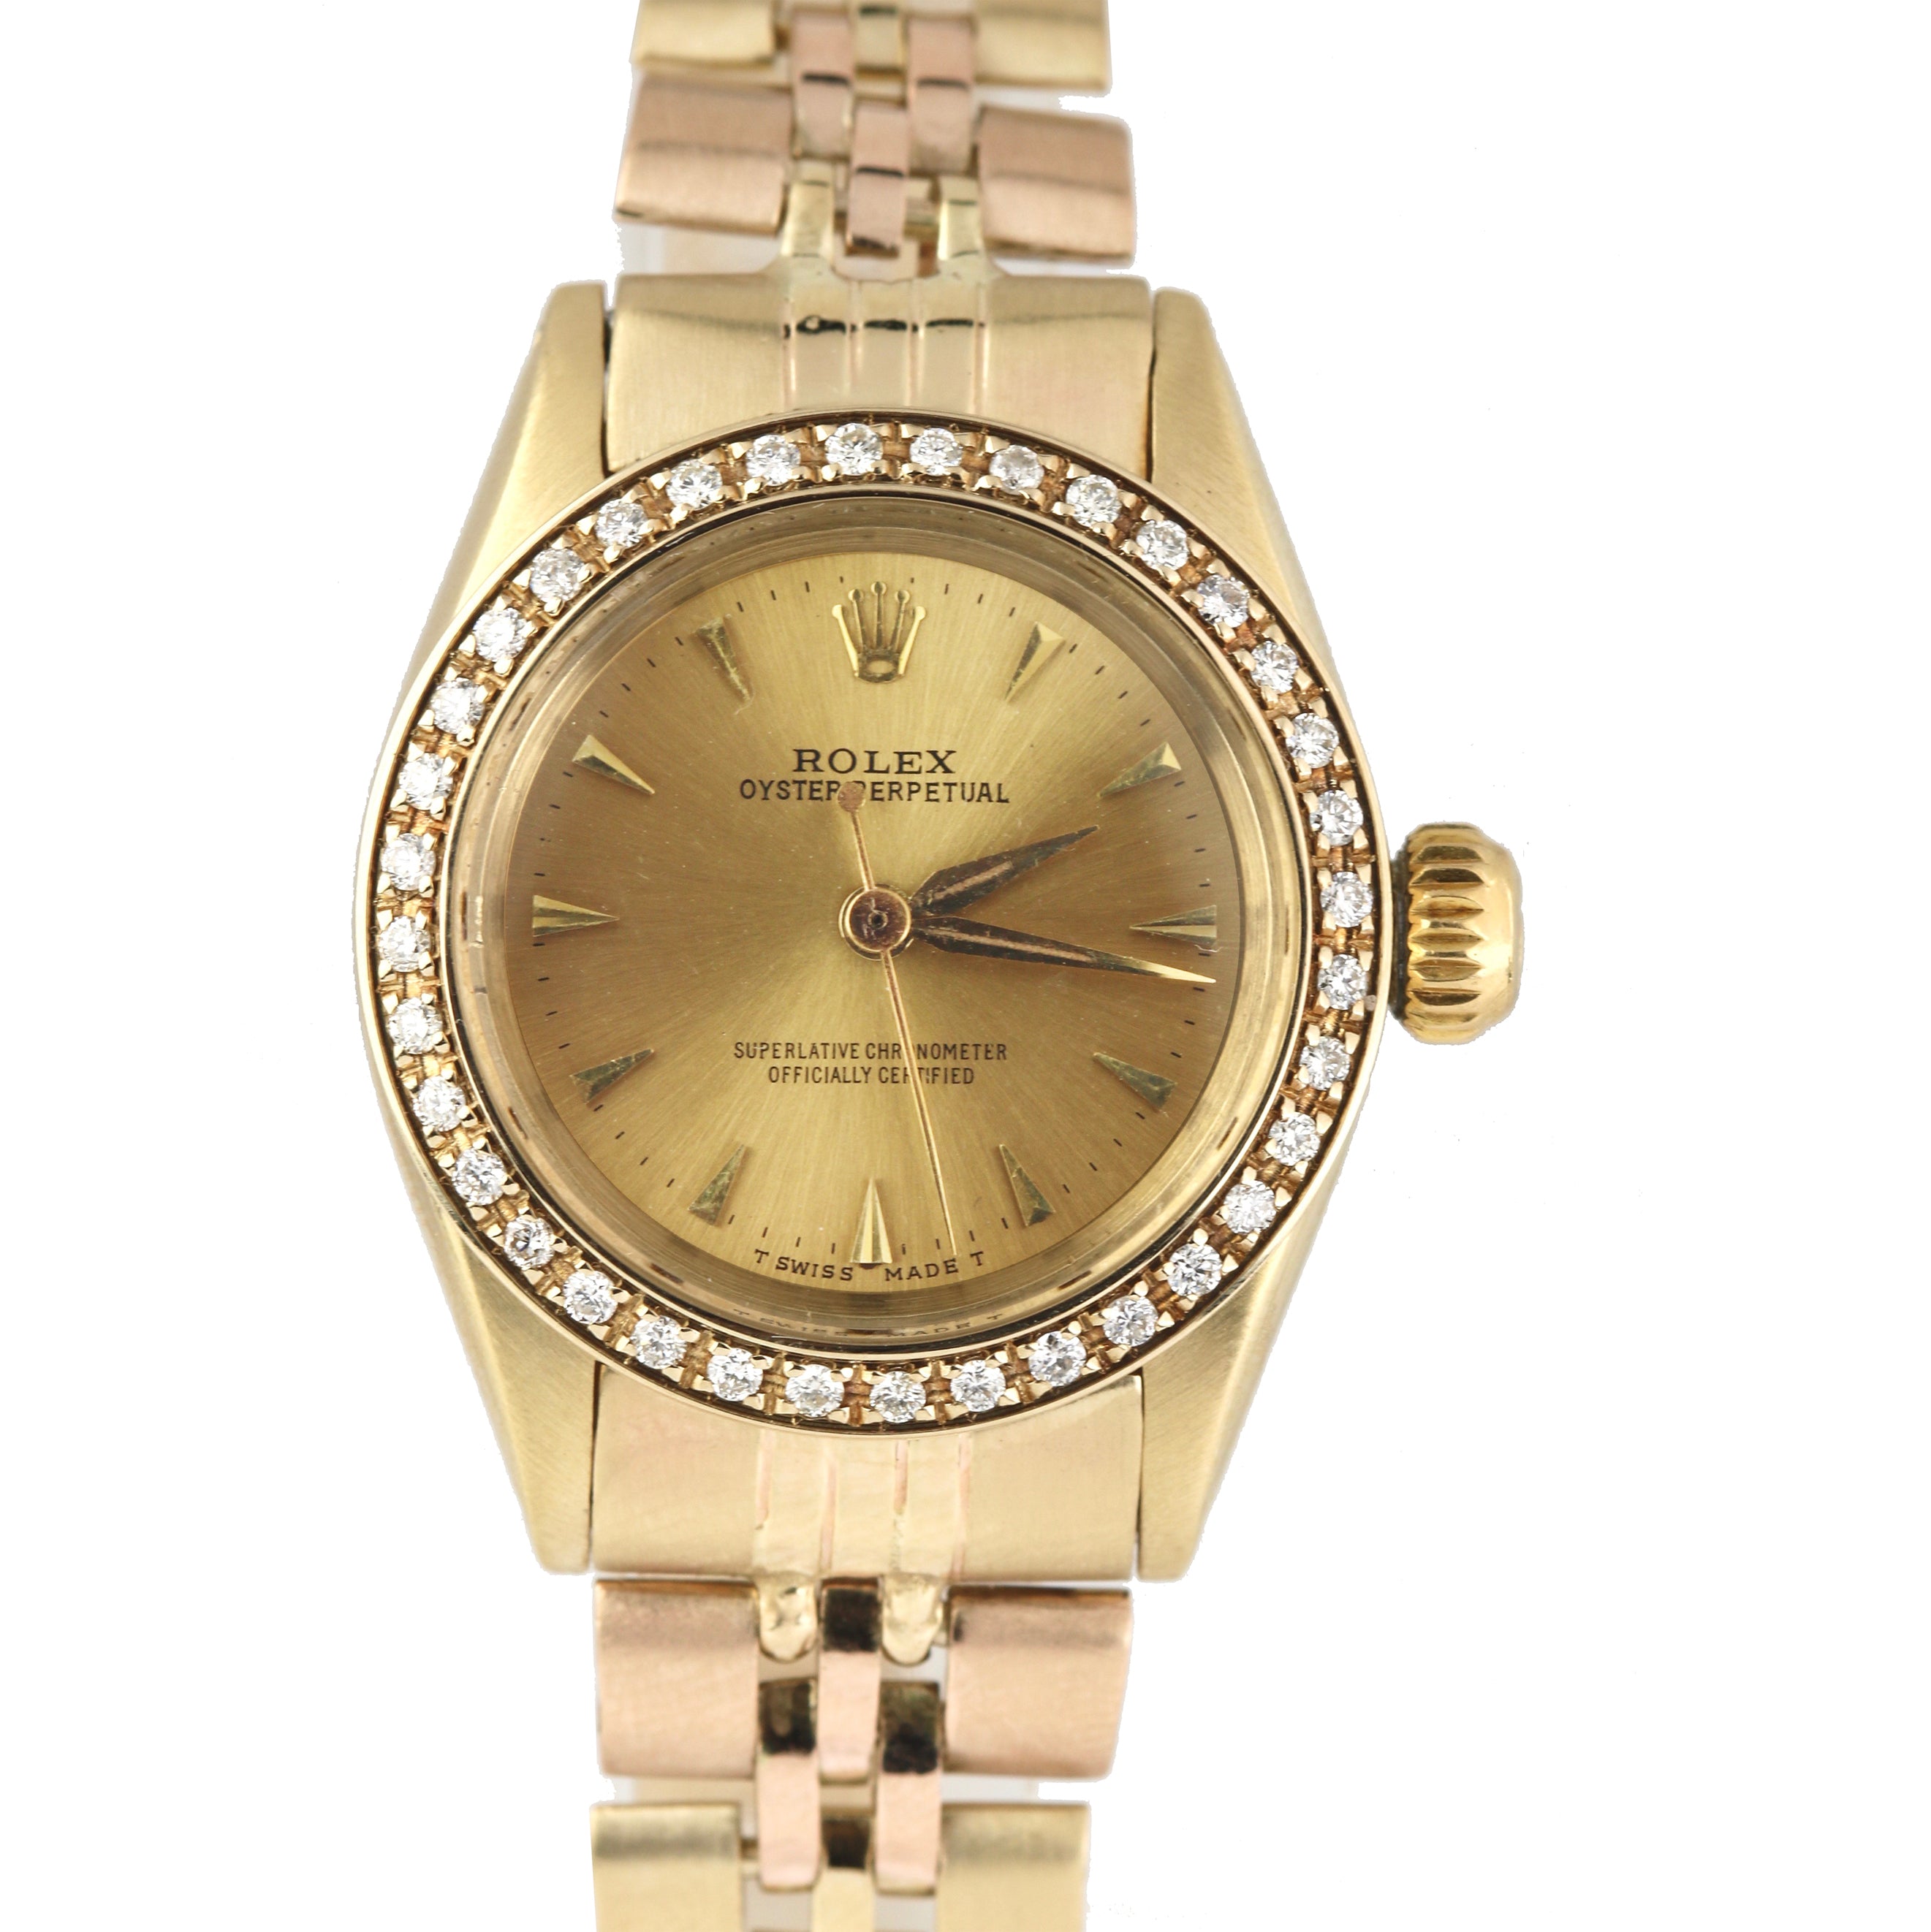 Ladies Rolex Oyster Perpetual 14k Gold 6619 26mm Diamond Watch